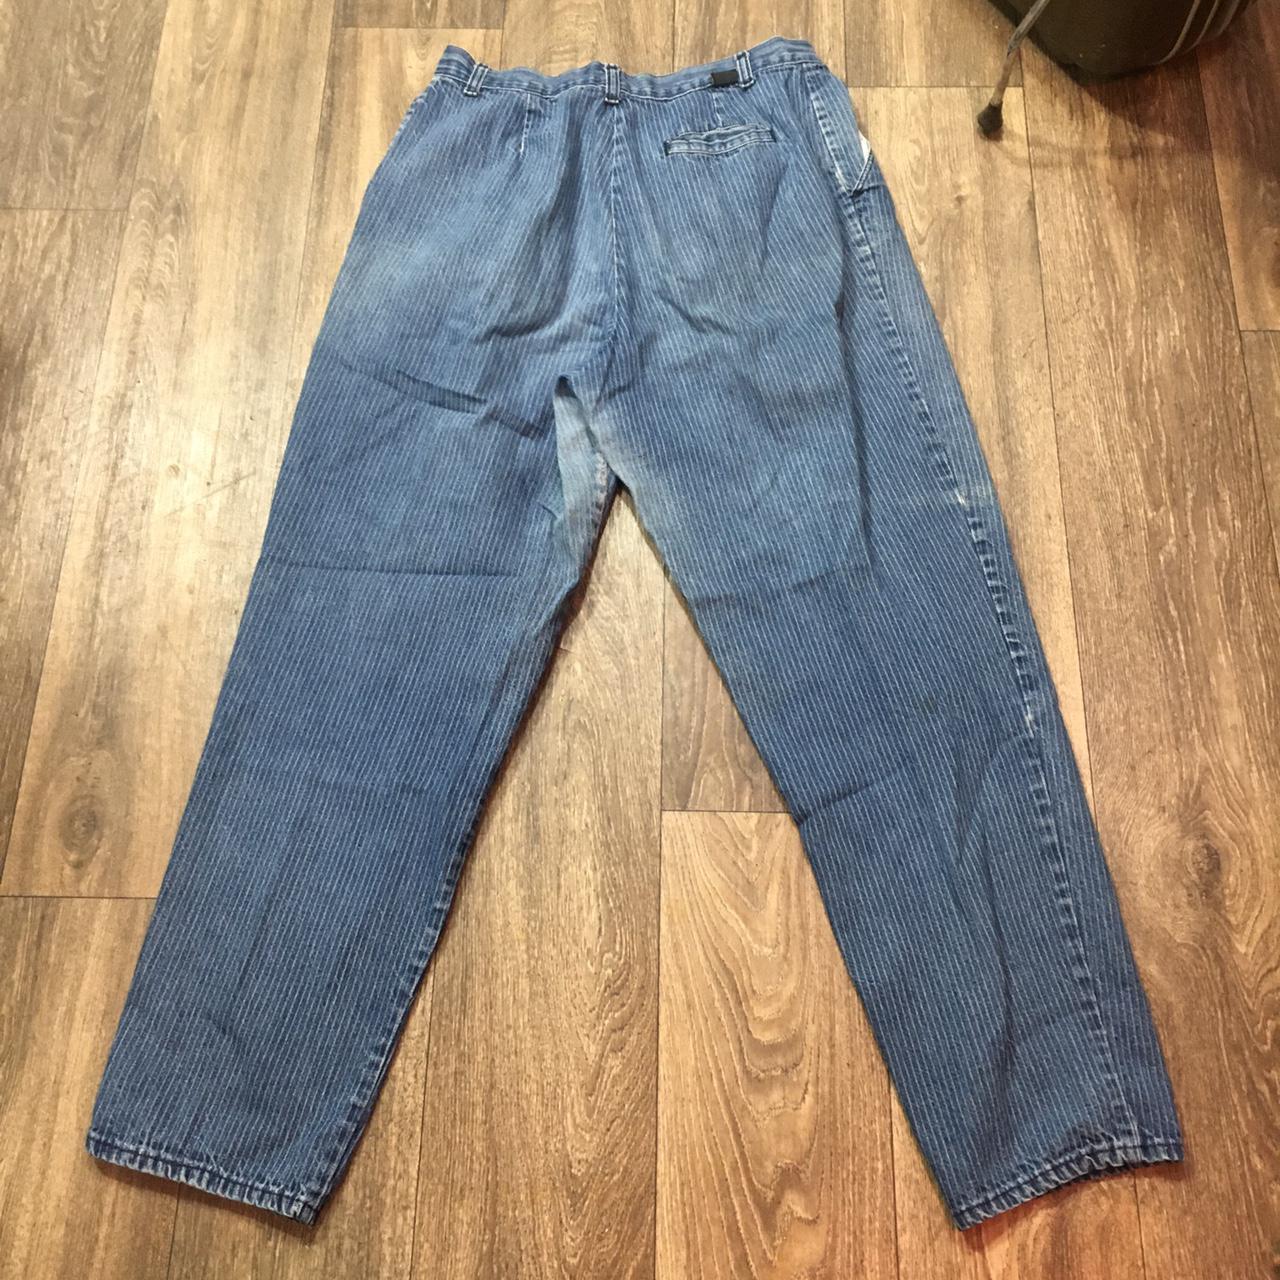 Women's Blue and White Jeans (4)